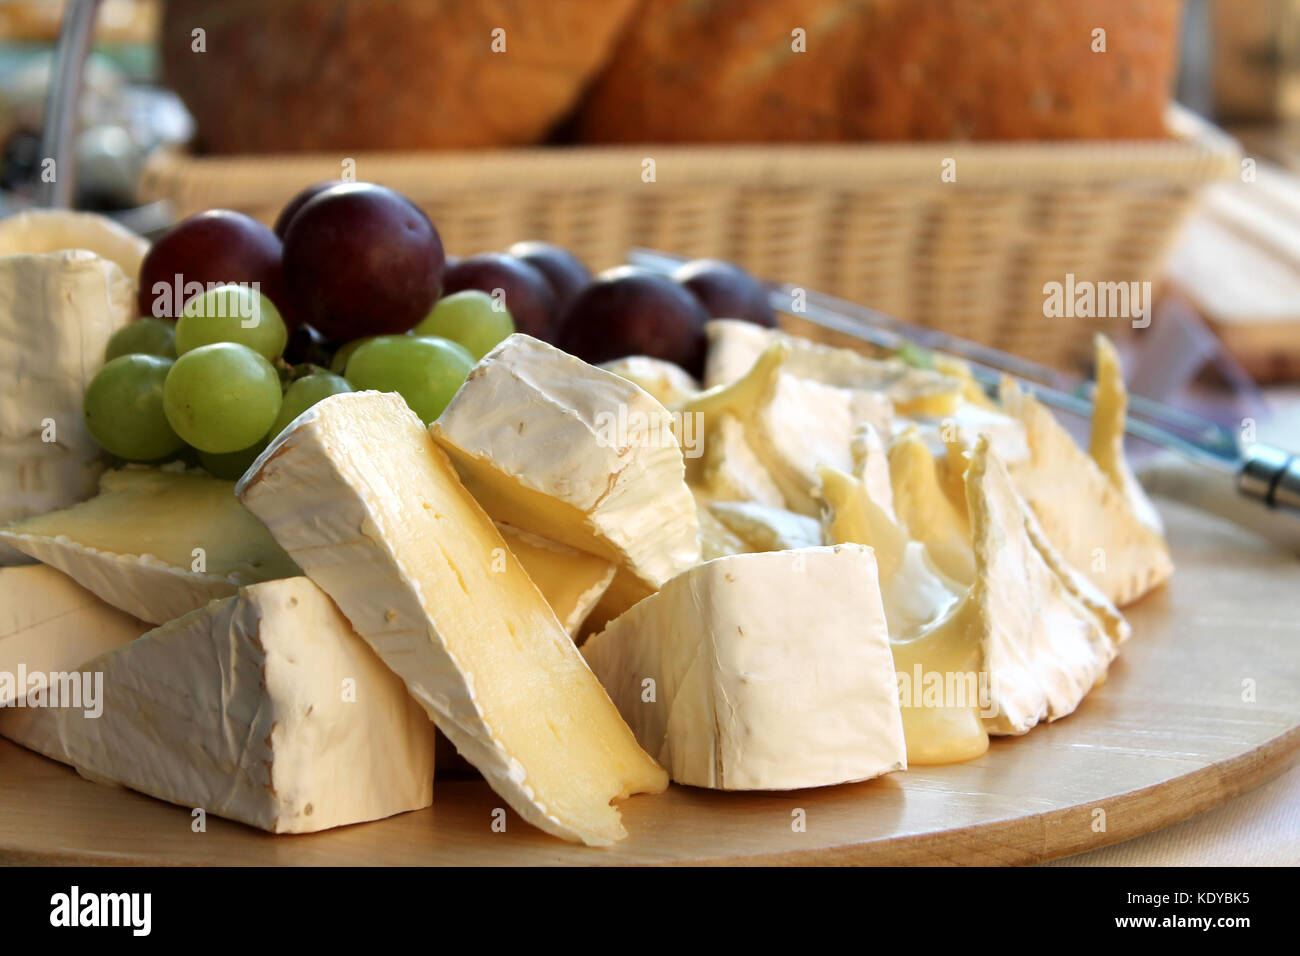 Piece of Brie Cream Cheese on dinner table close-up. Stock Photo